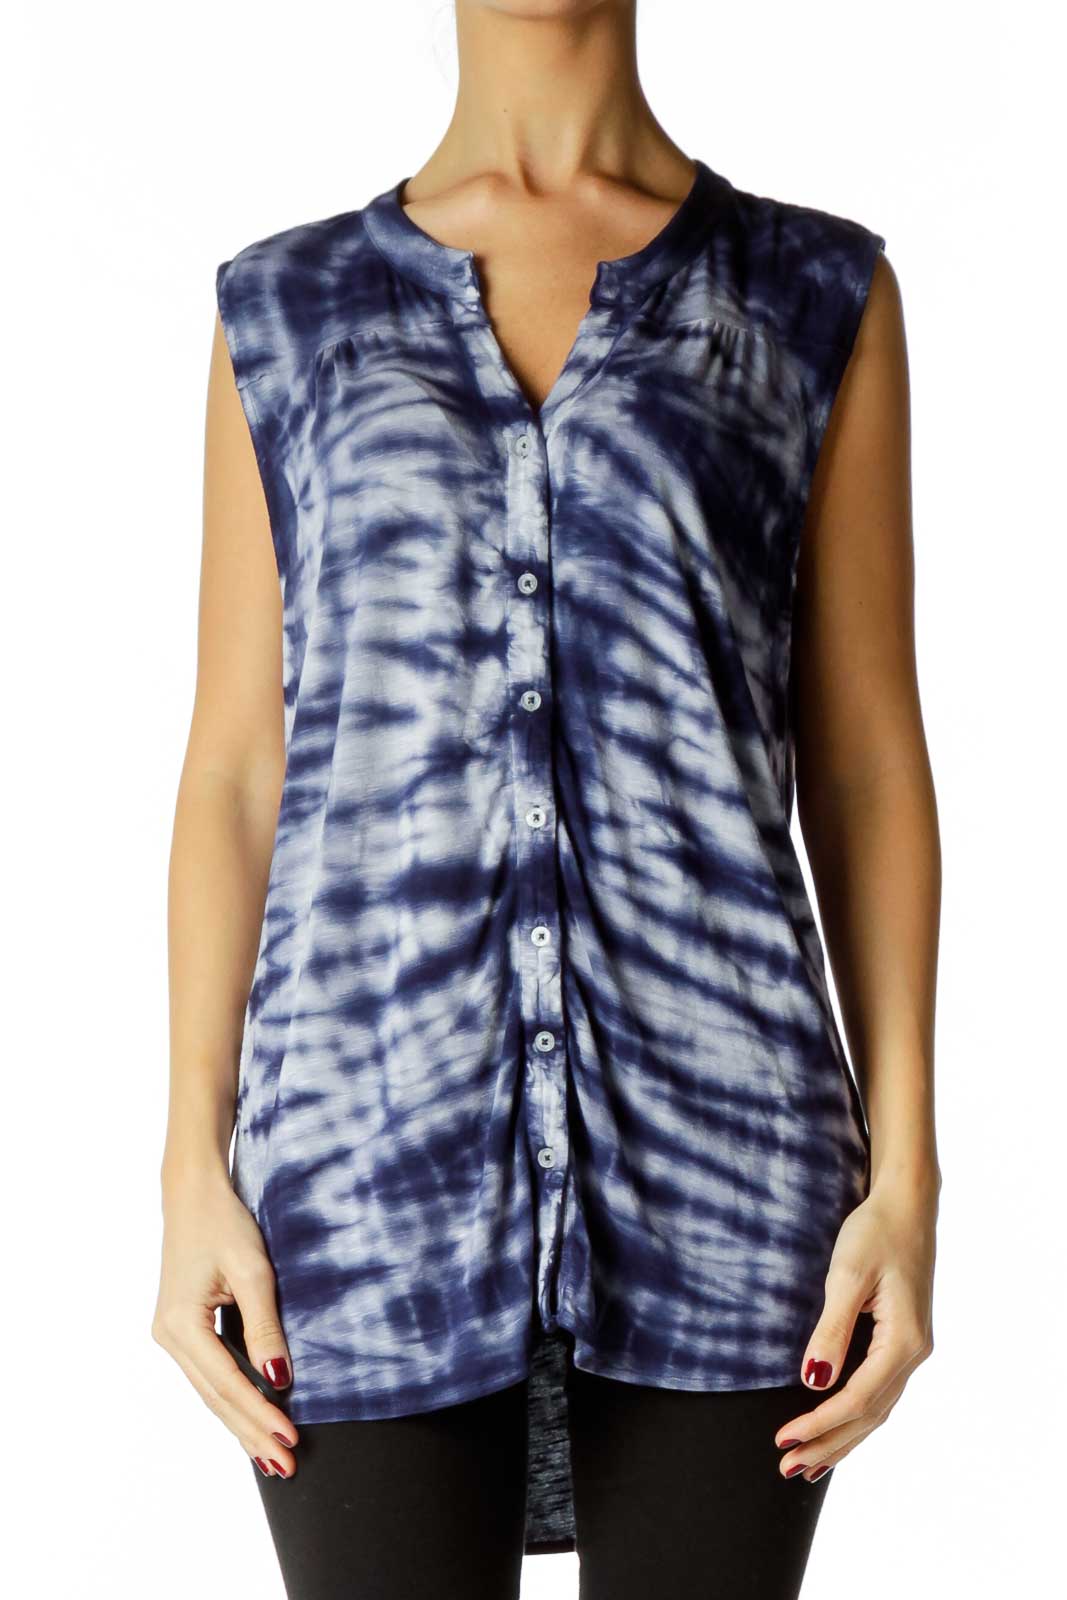 Blue Tie Dye Soft Sleeveless Top Front